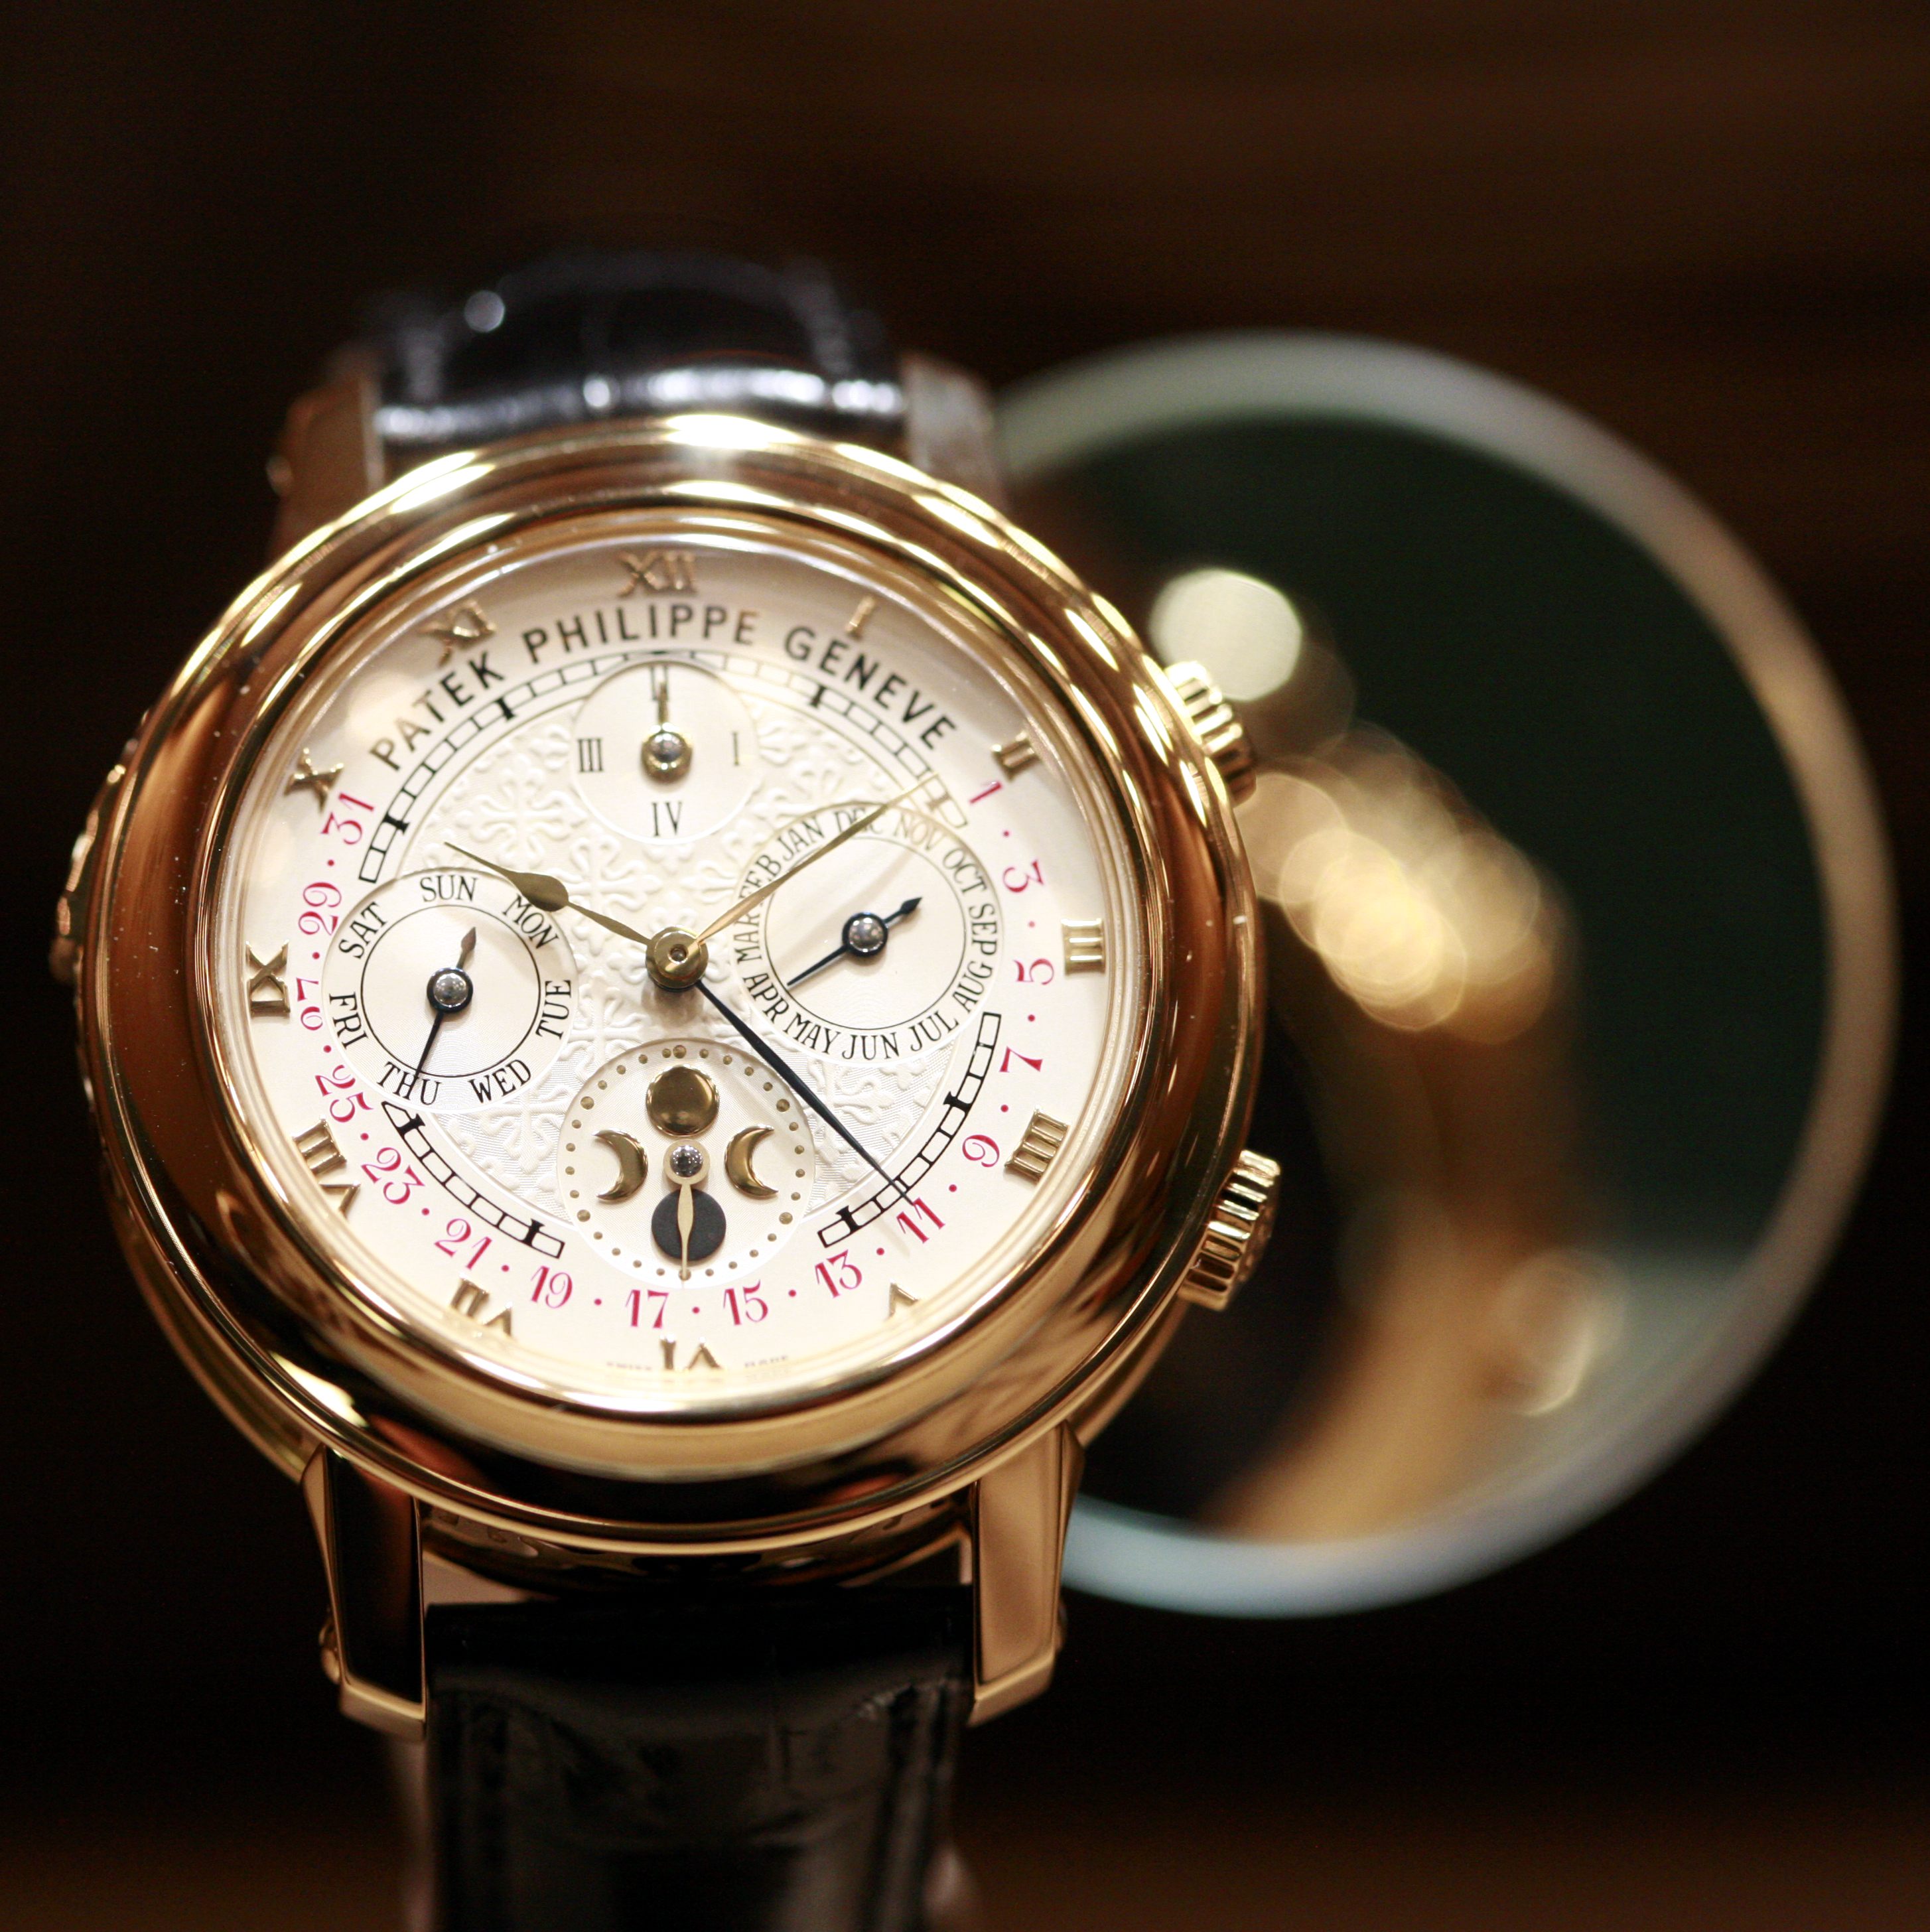 Expert Insights: Evaluating the Value of Handmade in Patek Philippe Watches